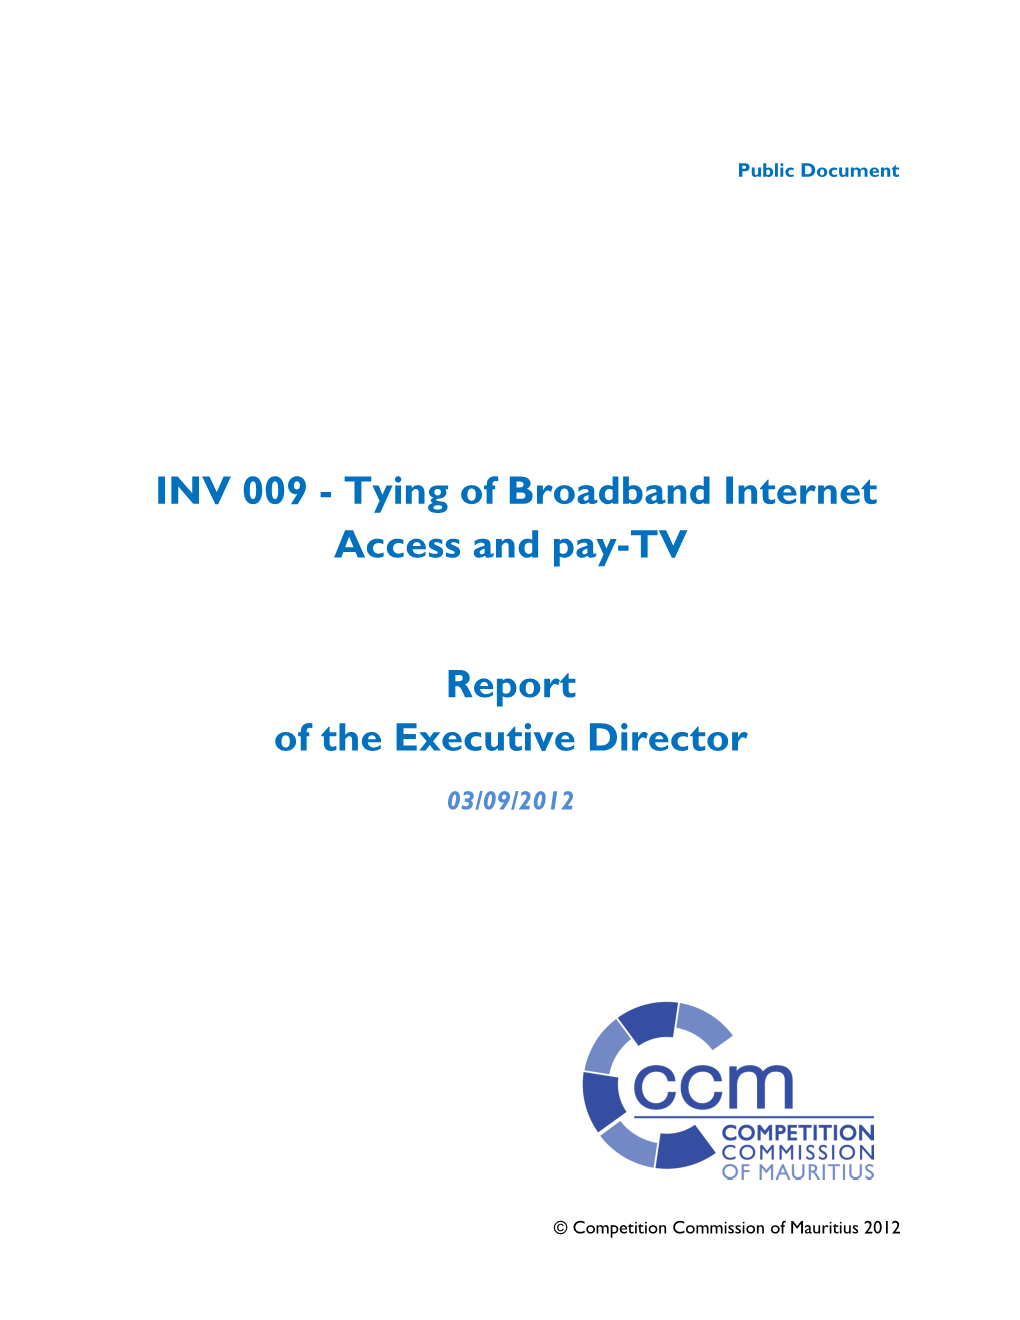 Tying of Broadband Internet Access and Pay-TV